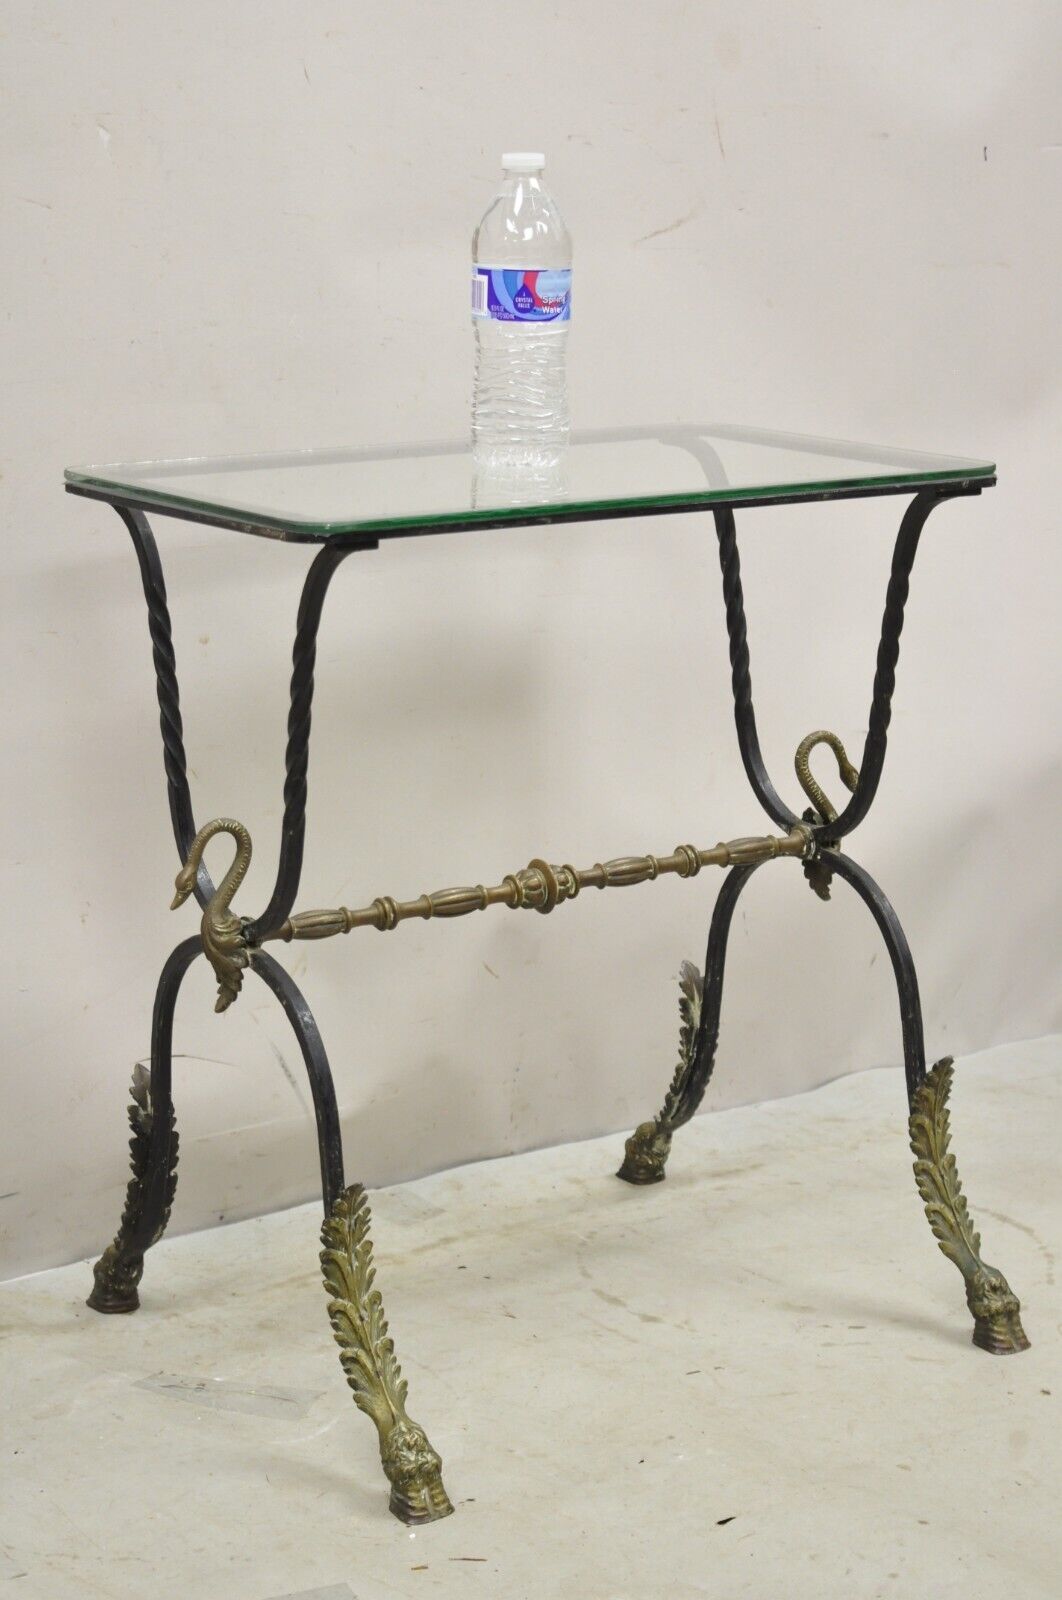 Antique Italian Regency Neoclassical Wrought Iron & Bronze Swan Small Side Table